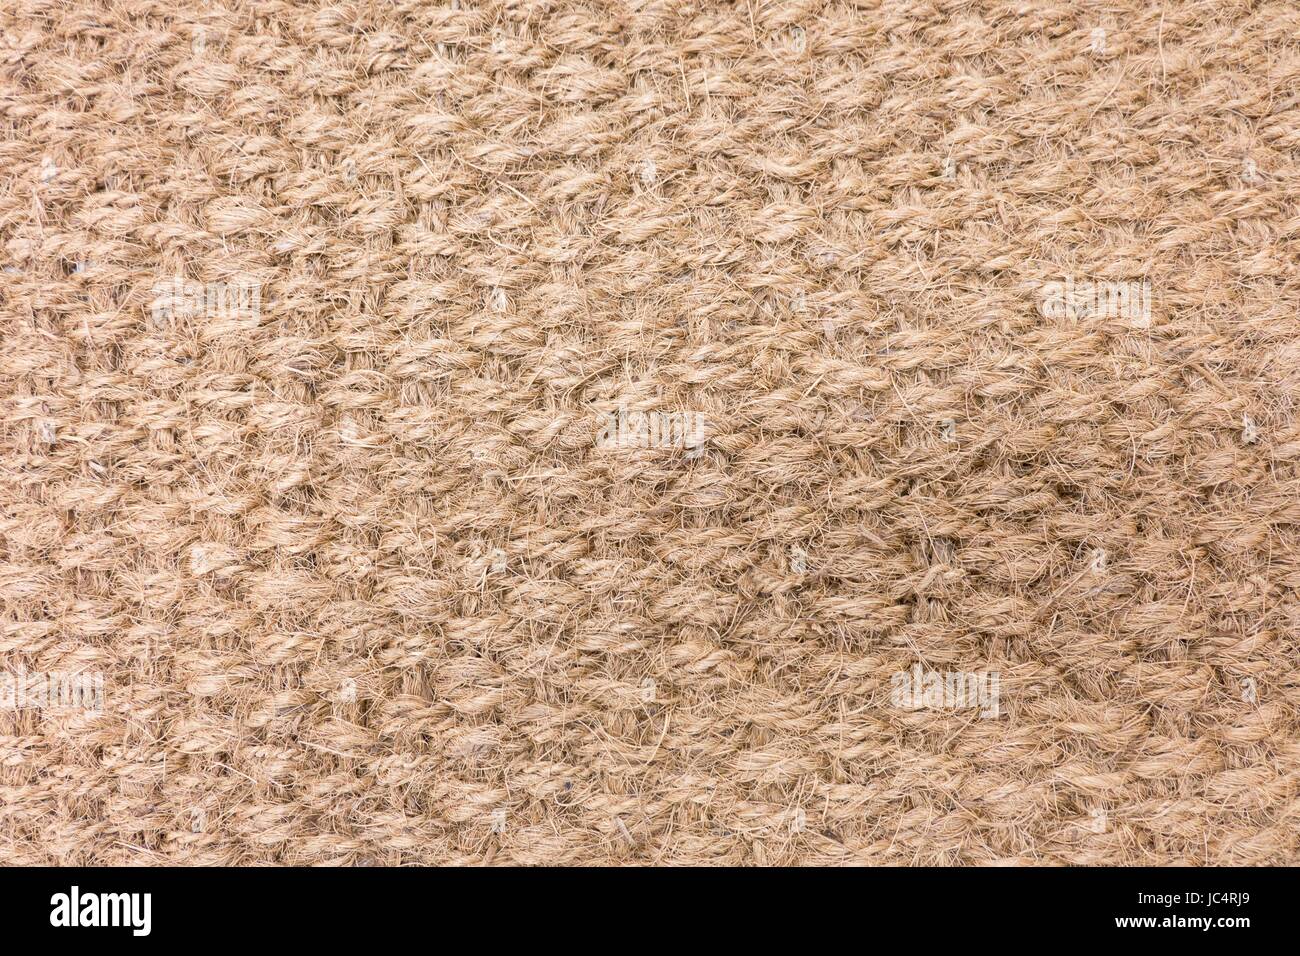 Fabric Texture, Close Up of Brown Woven Rope Texture Pattern